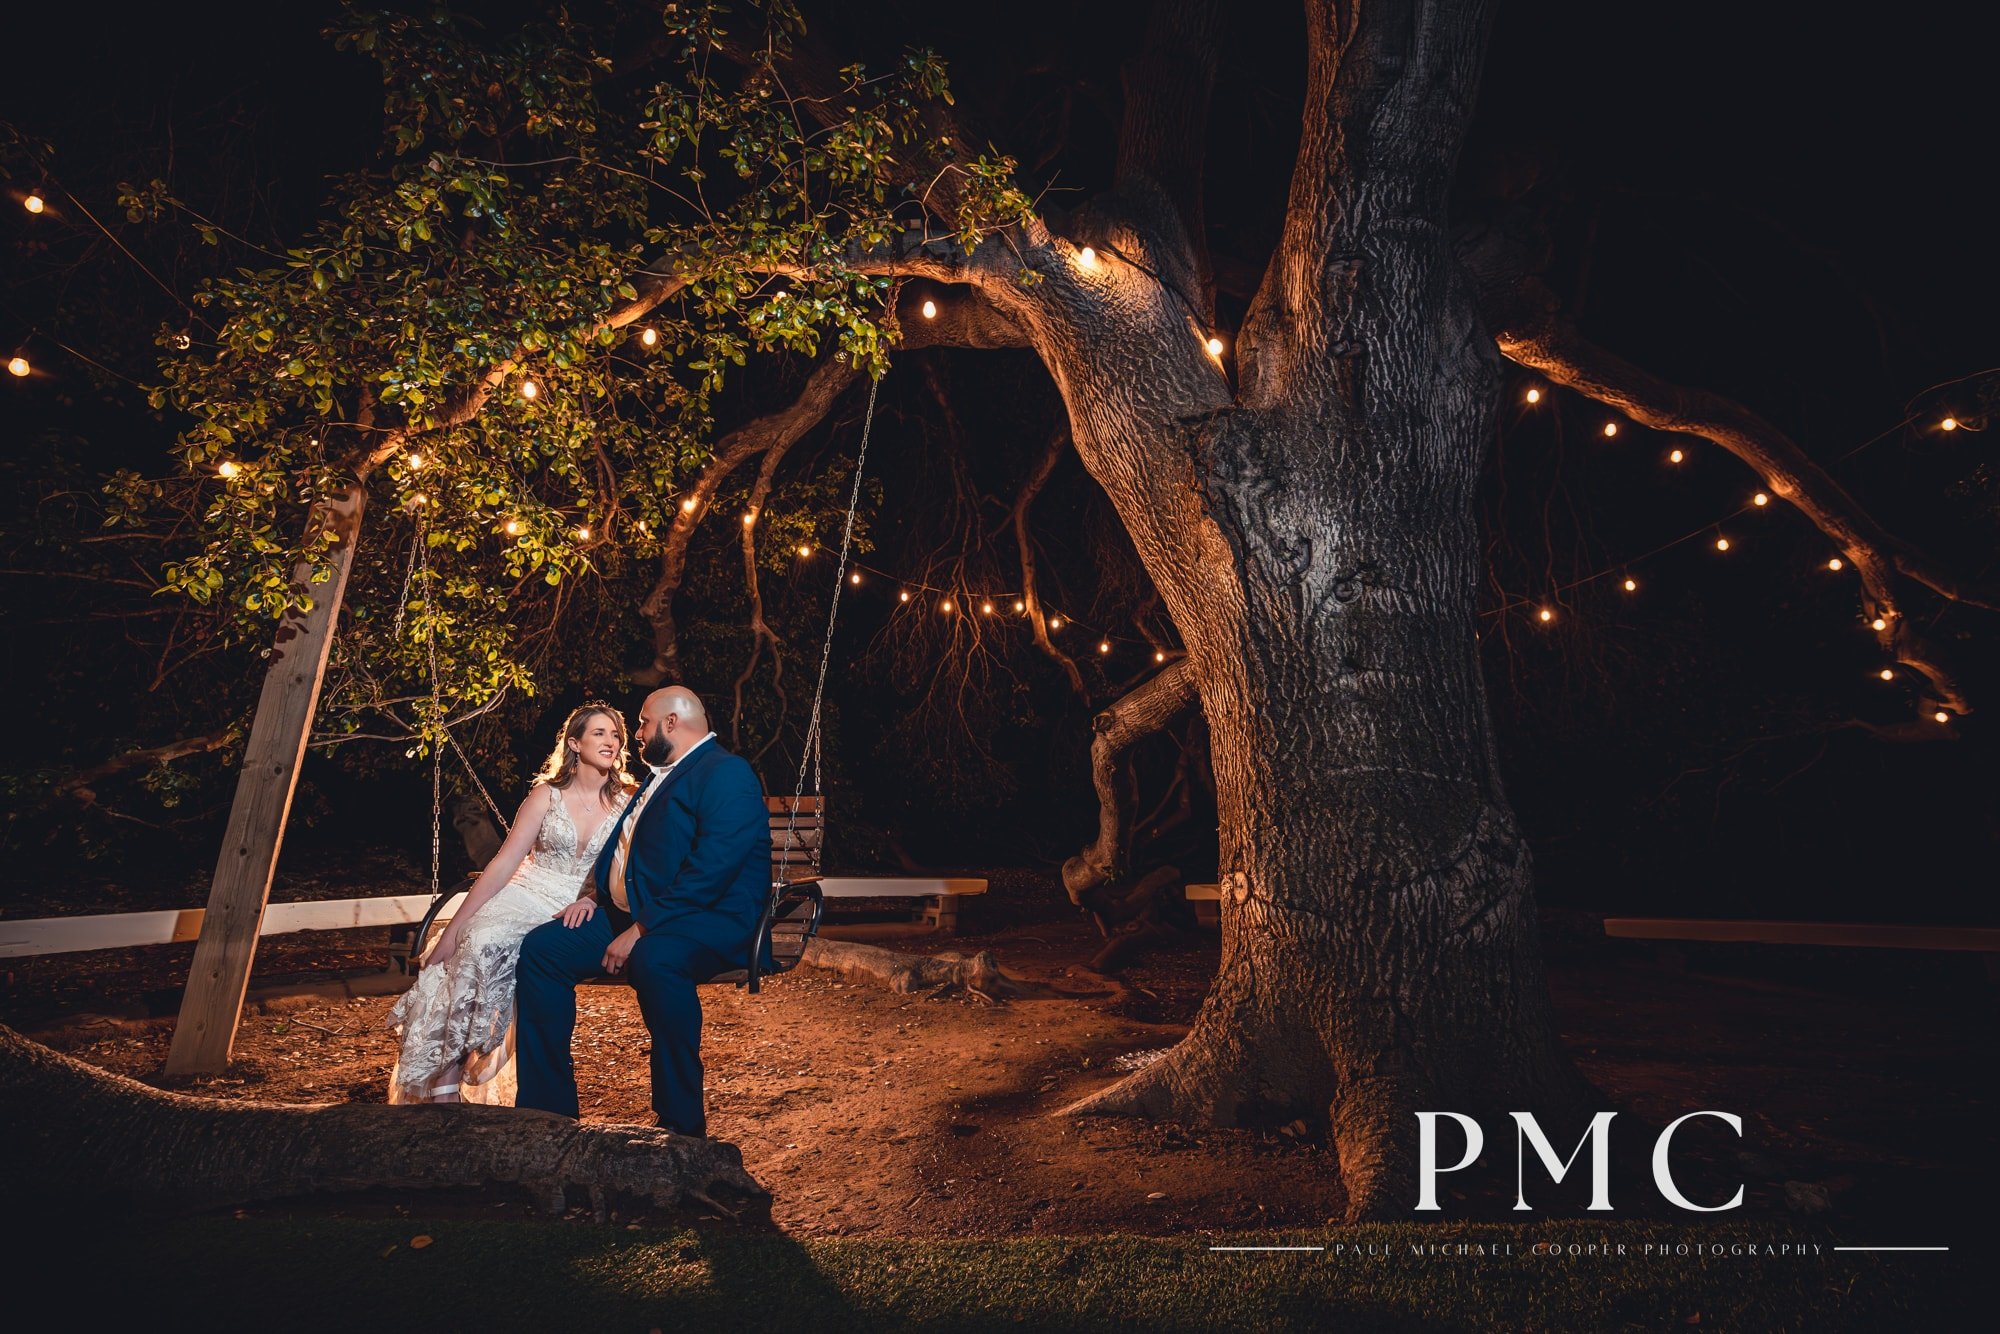 Taylor + Raul | "Mexican-Rustic" Barn and Nature Wedding in the Oaks | Temecula, California